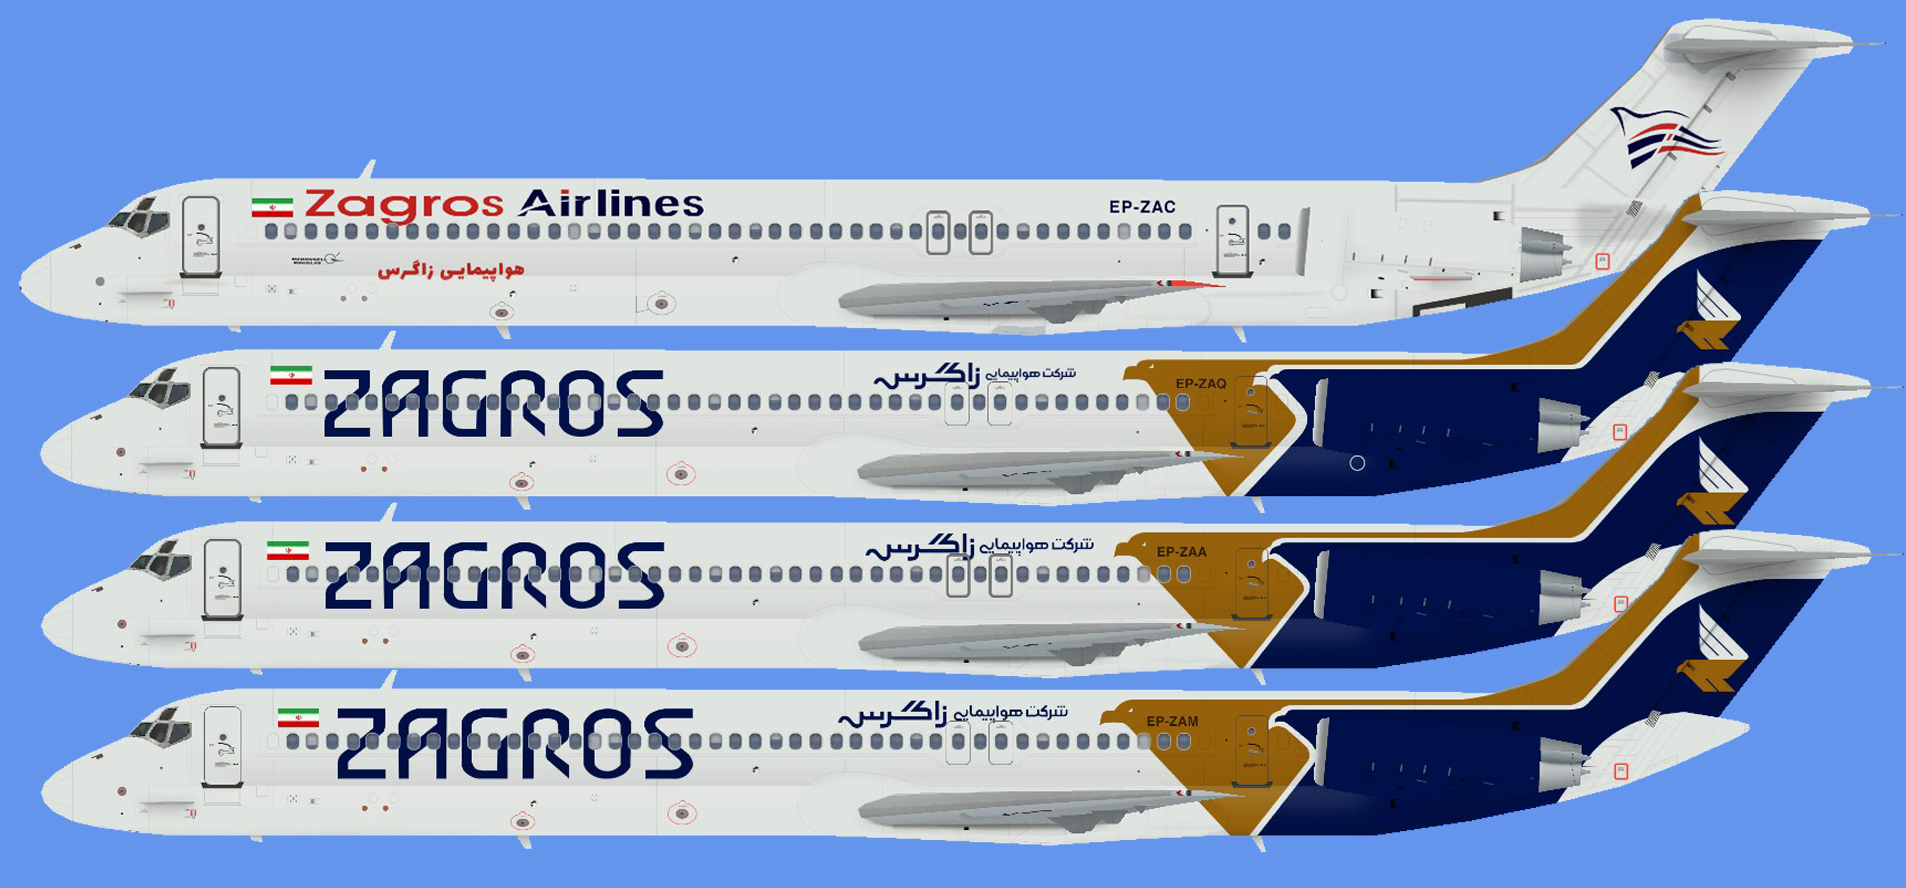 Zagros Airlines MD-80